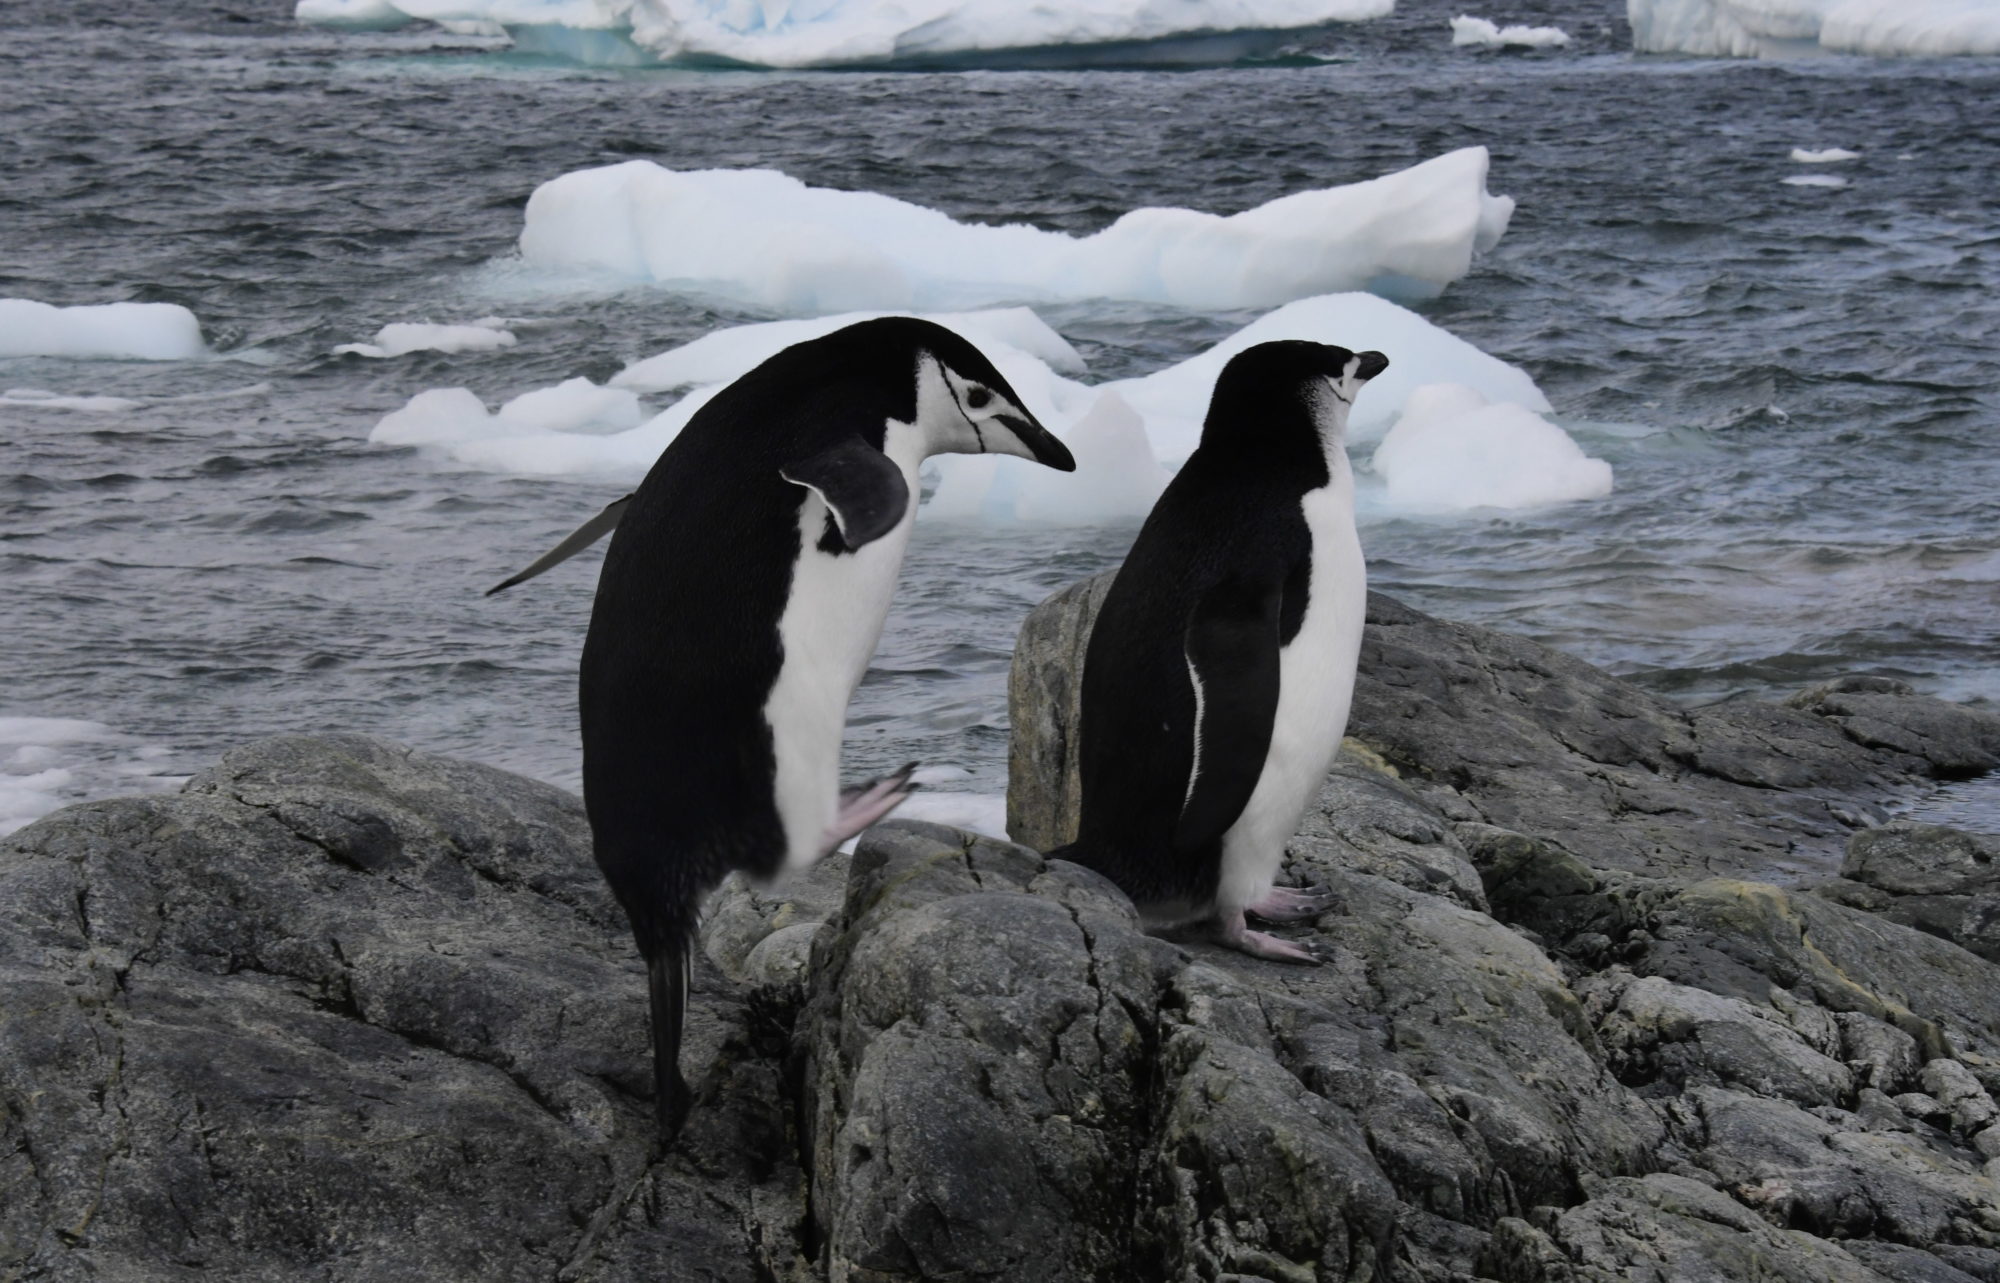 Two Chinstrap penguins, one leaping up, on a rock with icebergs and sea in background.